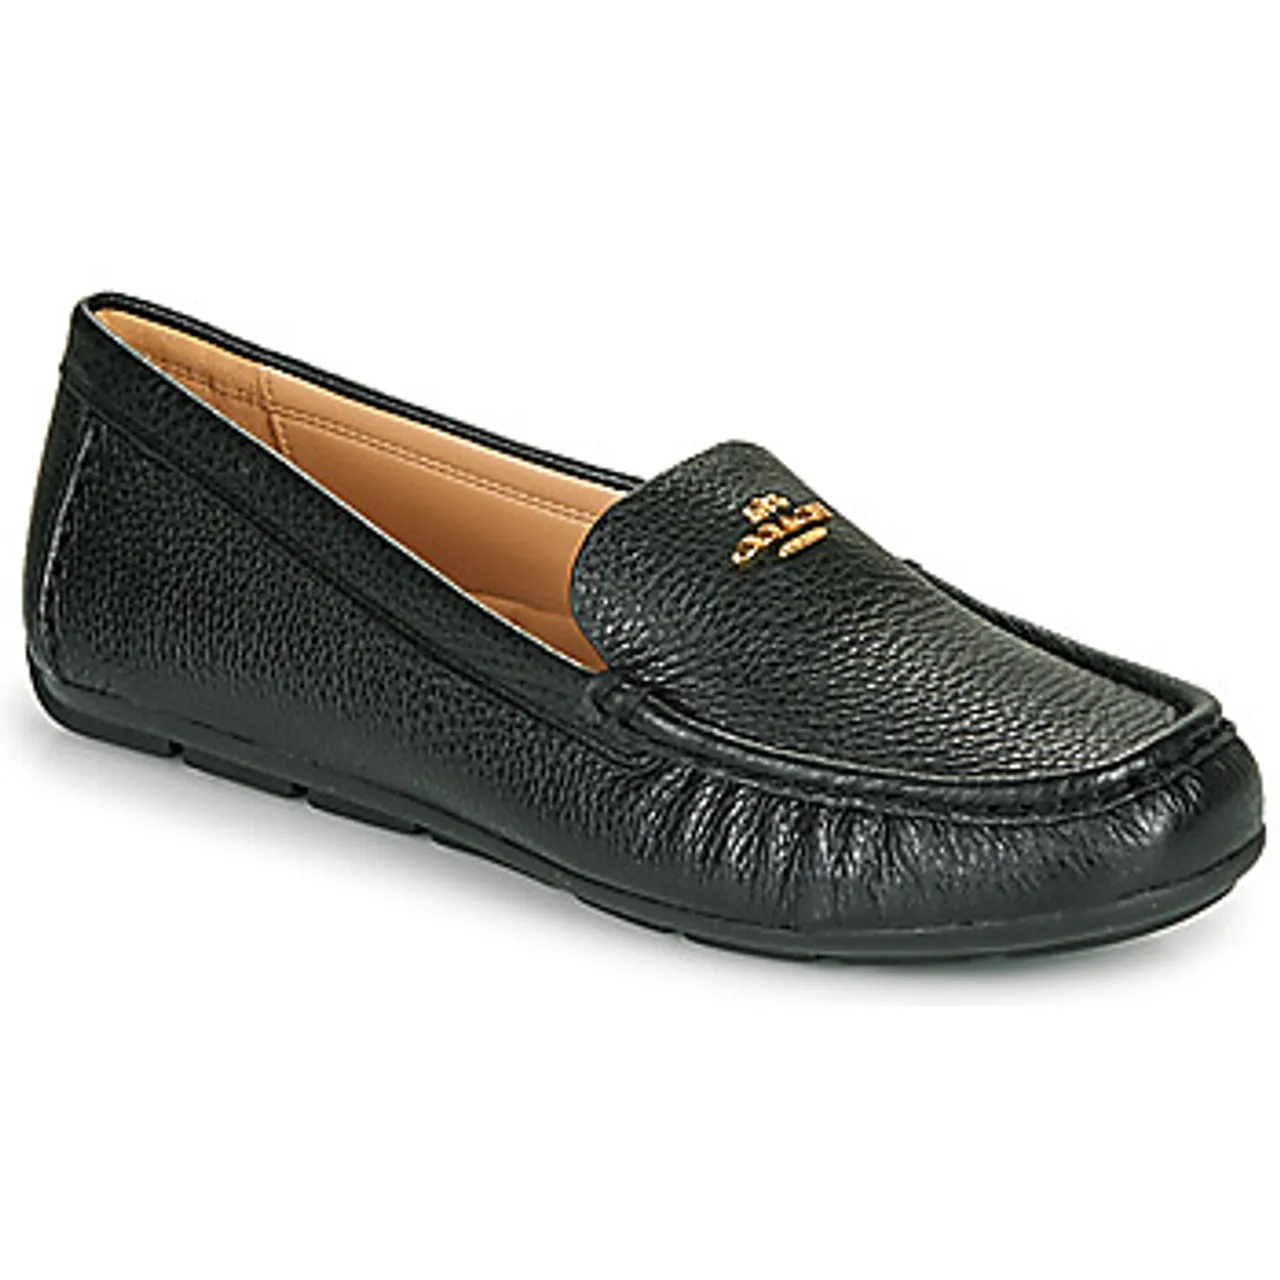 Coach  MARLEY  women's Loafers / Casual Shoes in Black